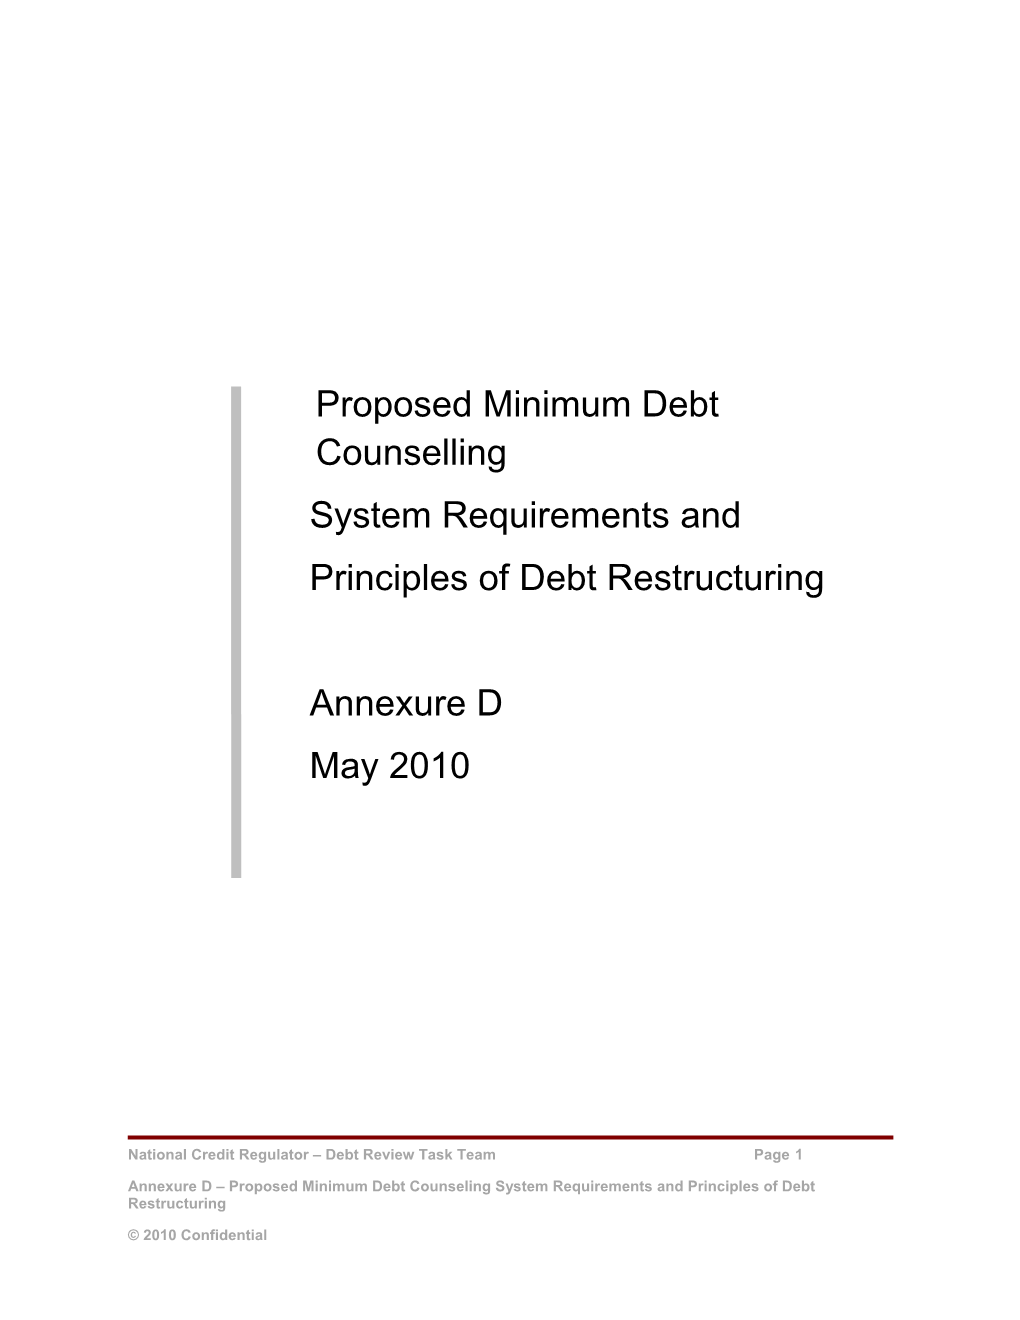 Proposed Minimum Debt Counselling